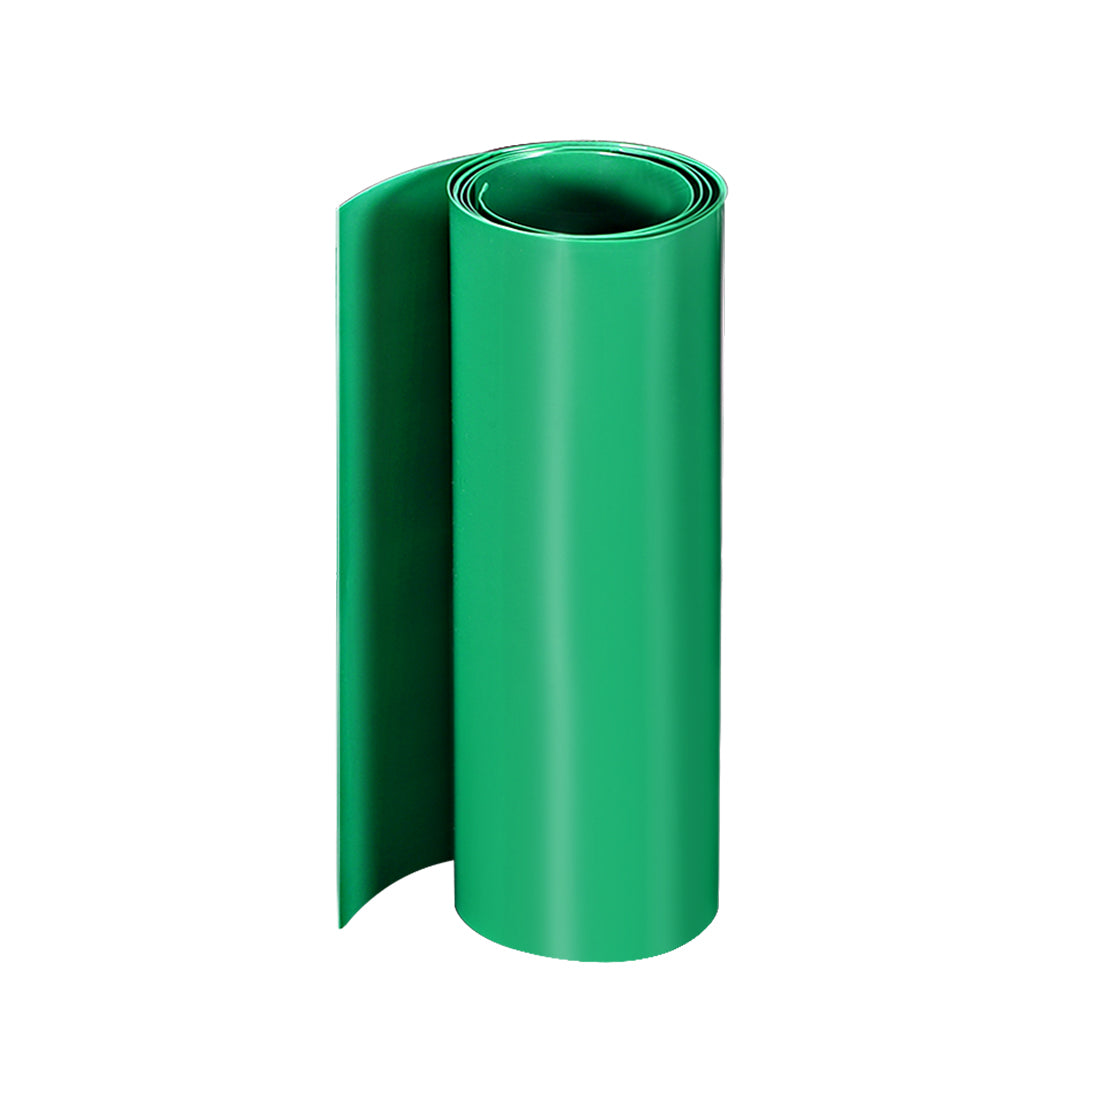 Uxcell Uxcell PVC Heat Shrink Tube 160mm Flat Width Wrap for Dual Layer 1 Meter Green